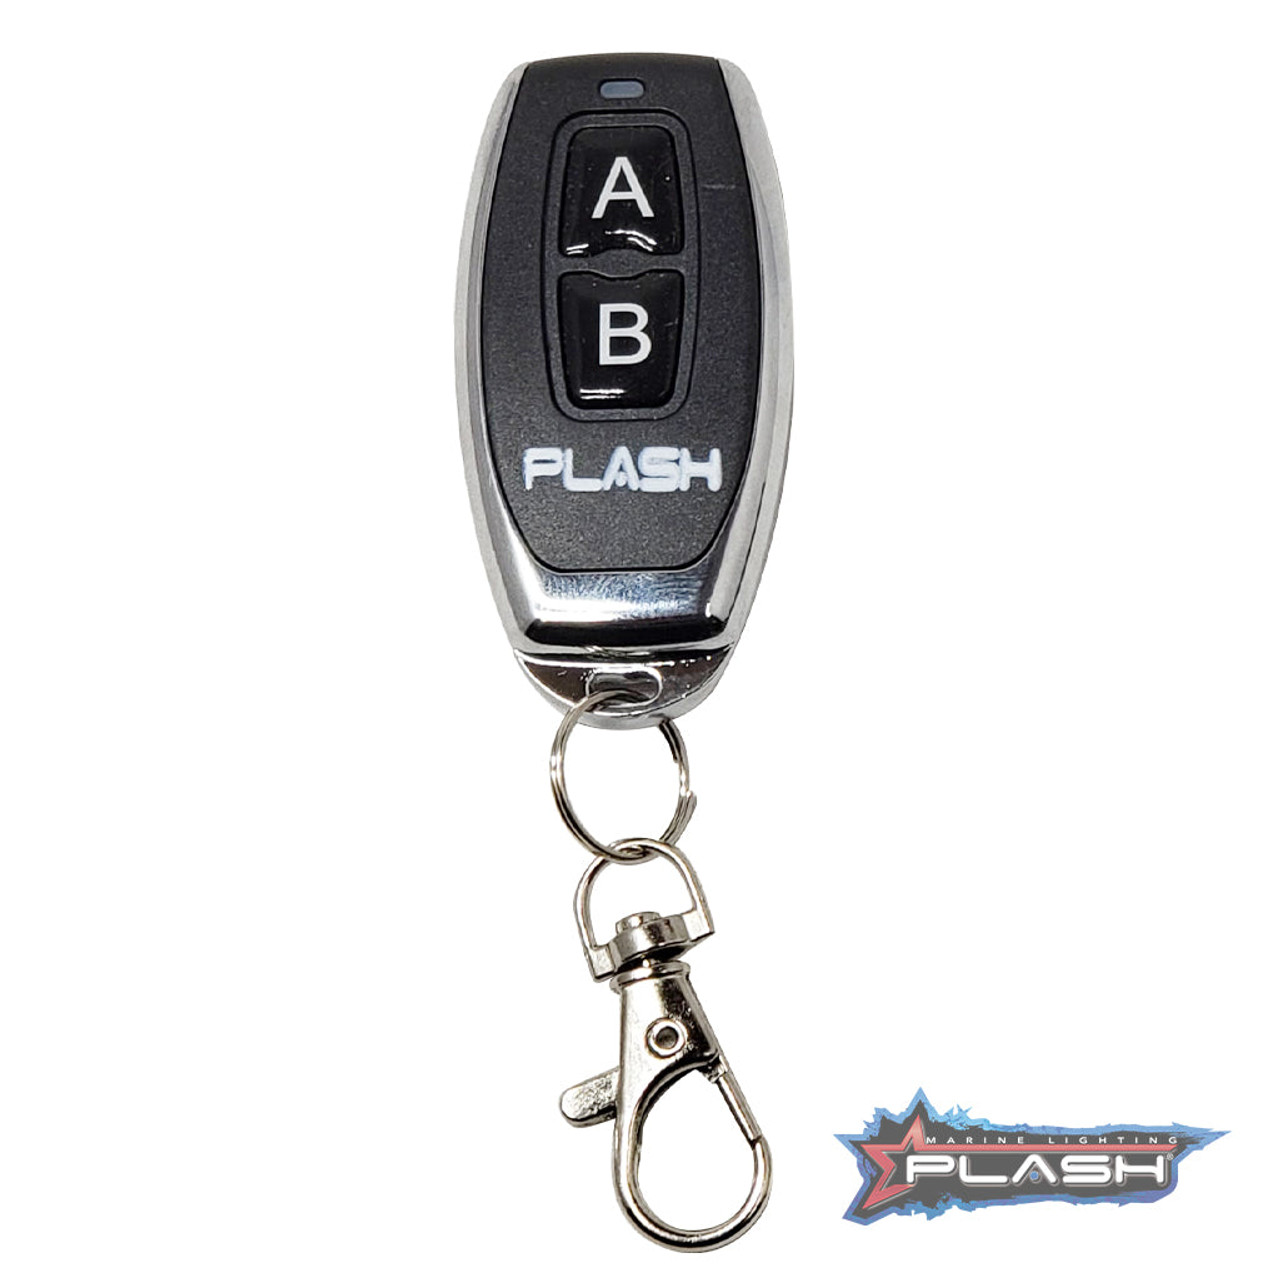 Plash - Waterproof Switch - with Key Fob Remote, 25A, 12-24V, IP68 (WH-WP-RS) - Apollo Lighting